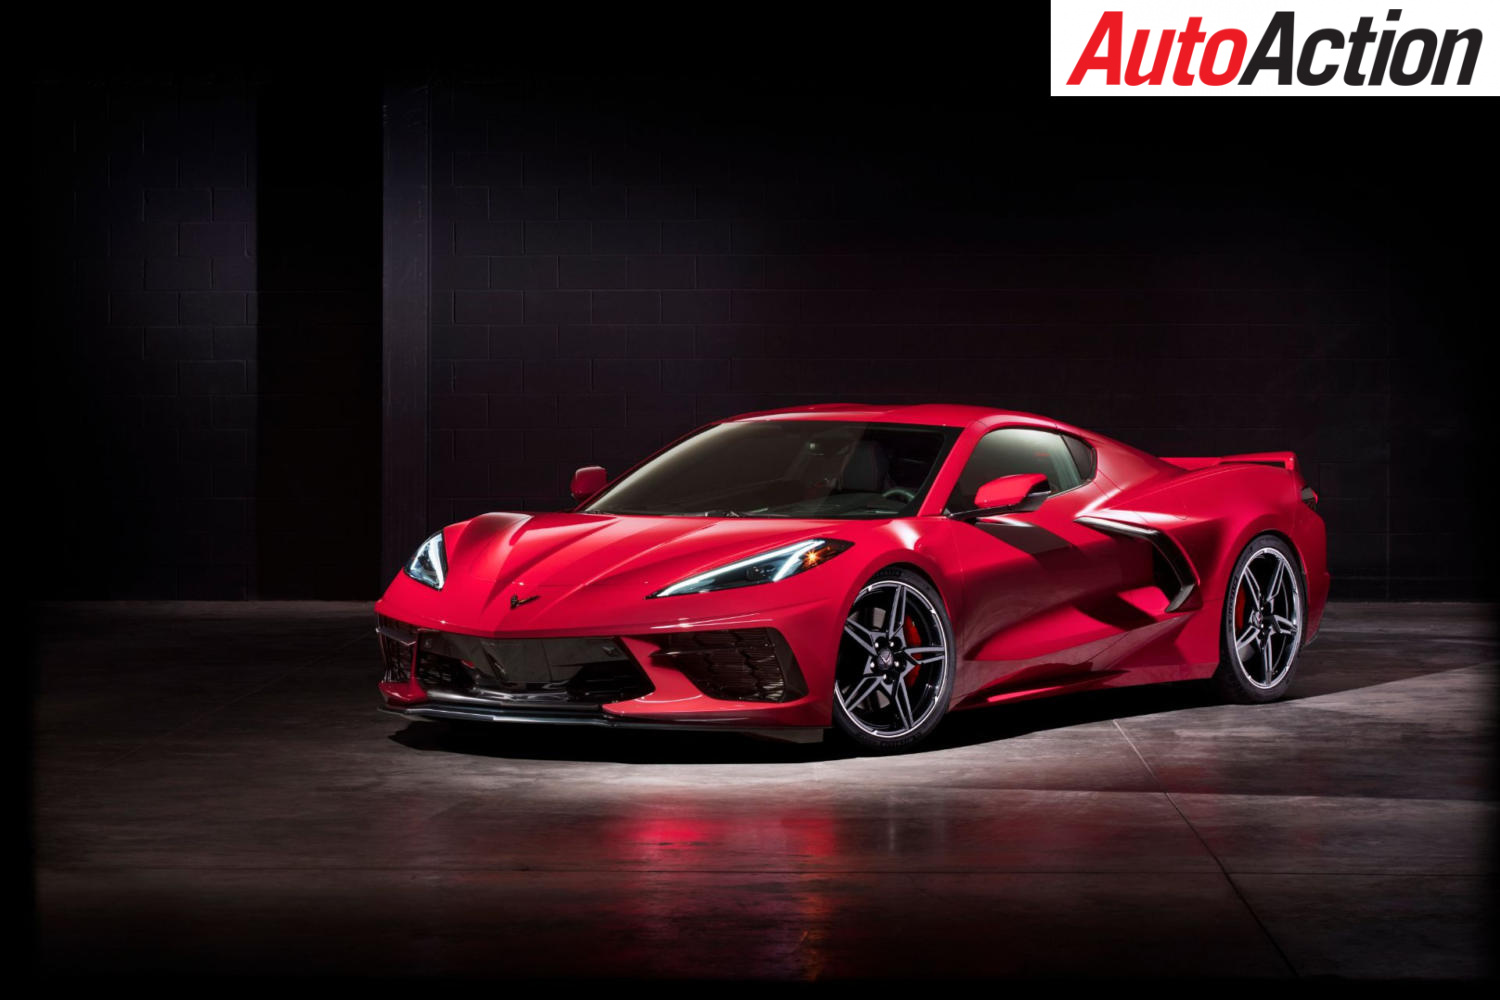 The new 2020 Chevrolet Corvette will race - Photo: Supplied